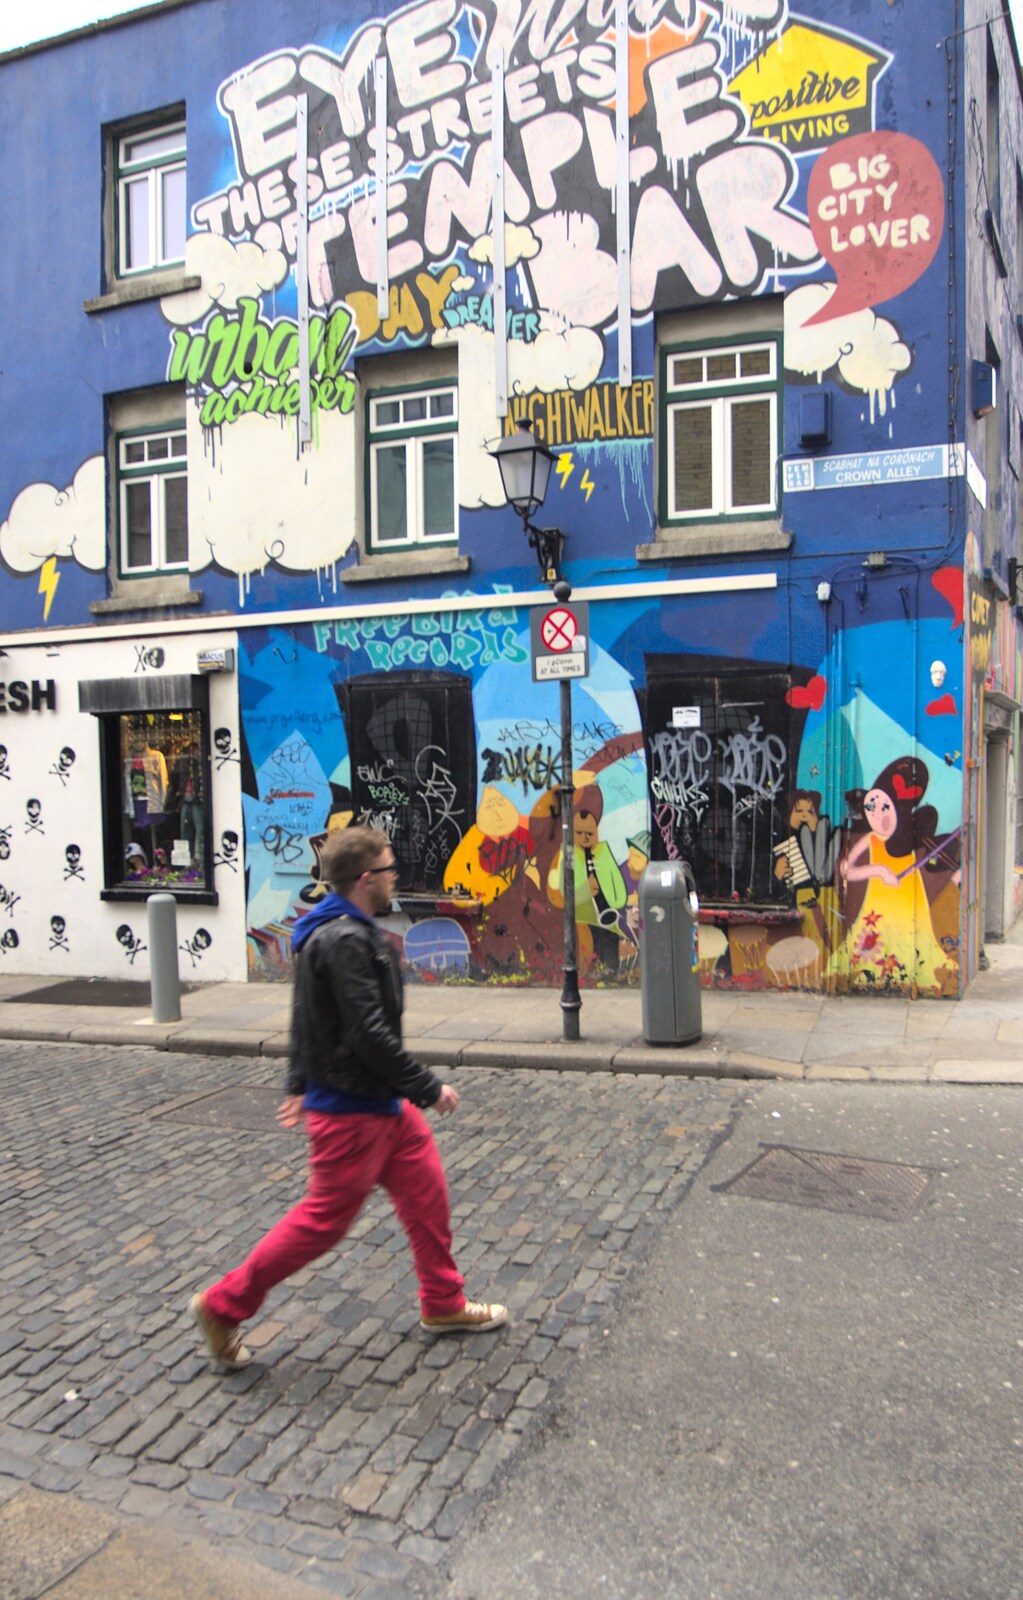 A Day in Dublin, Ireland - 7th January 2012: A dude walks past a painted building in Temple Bar